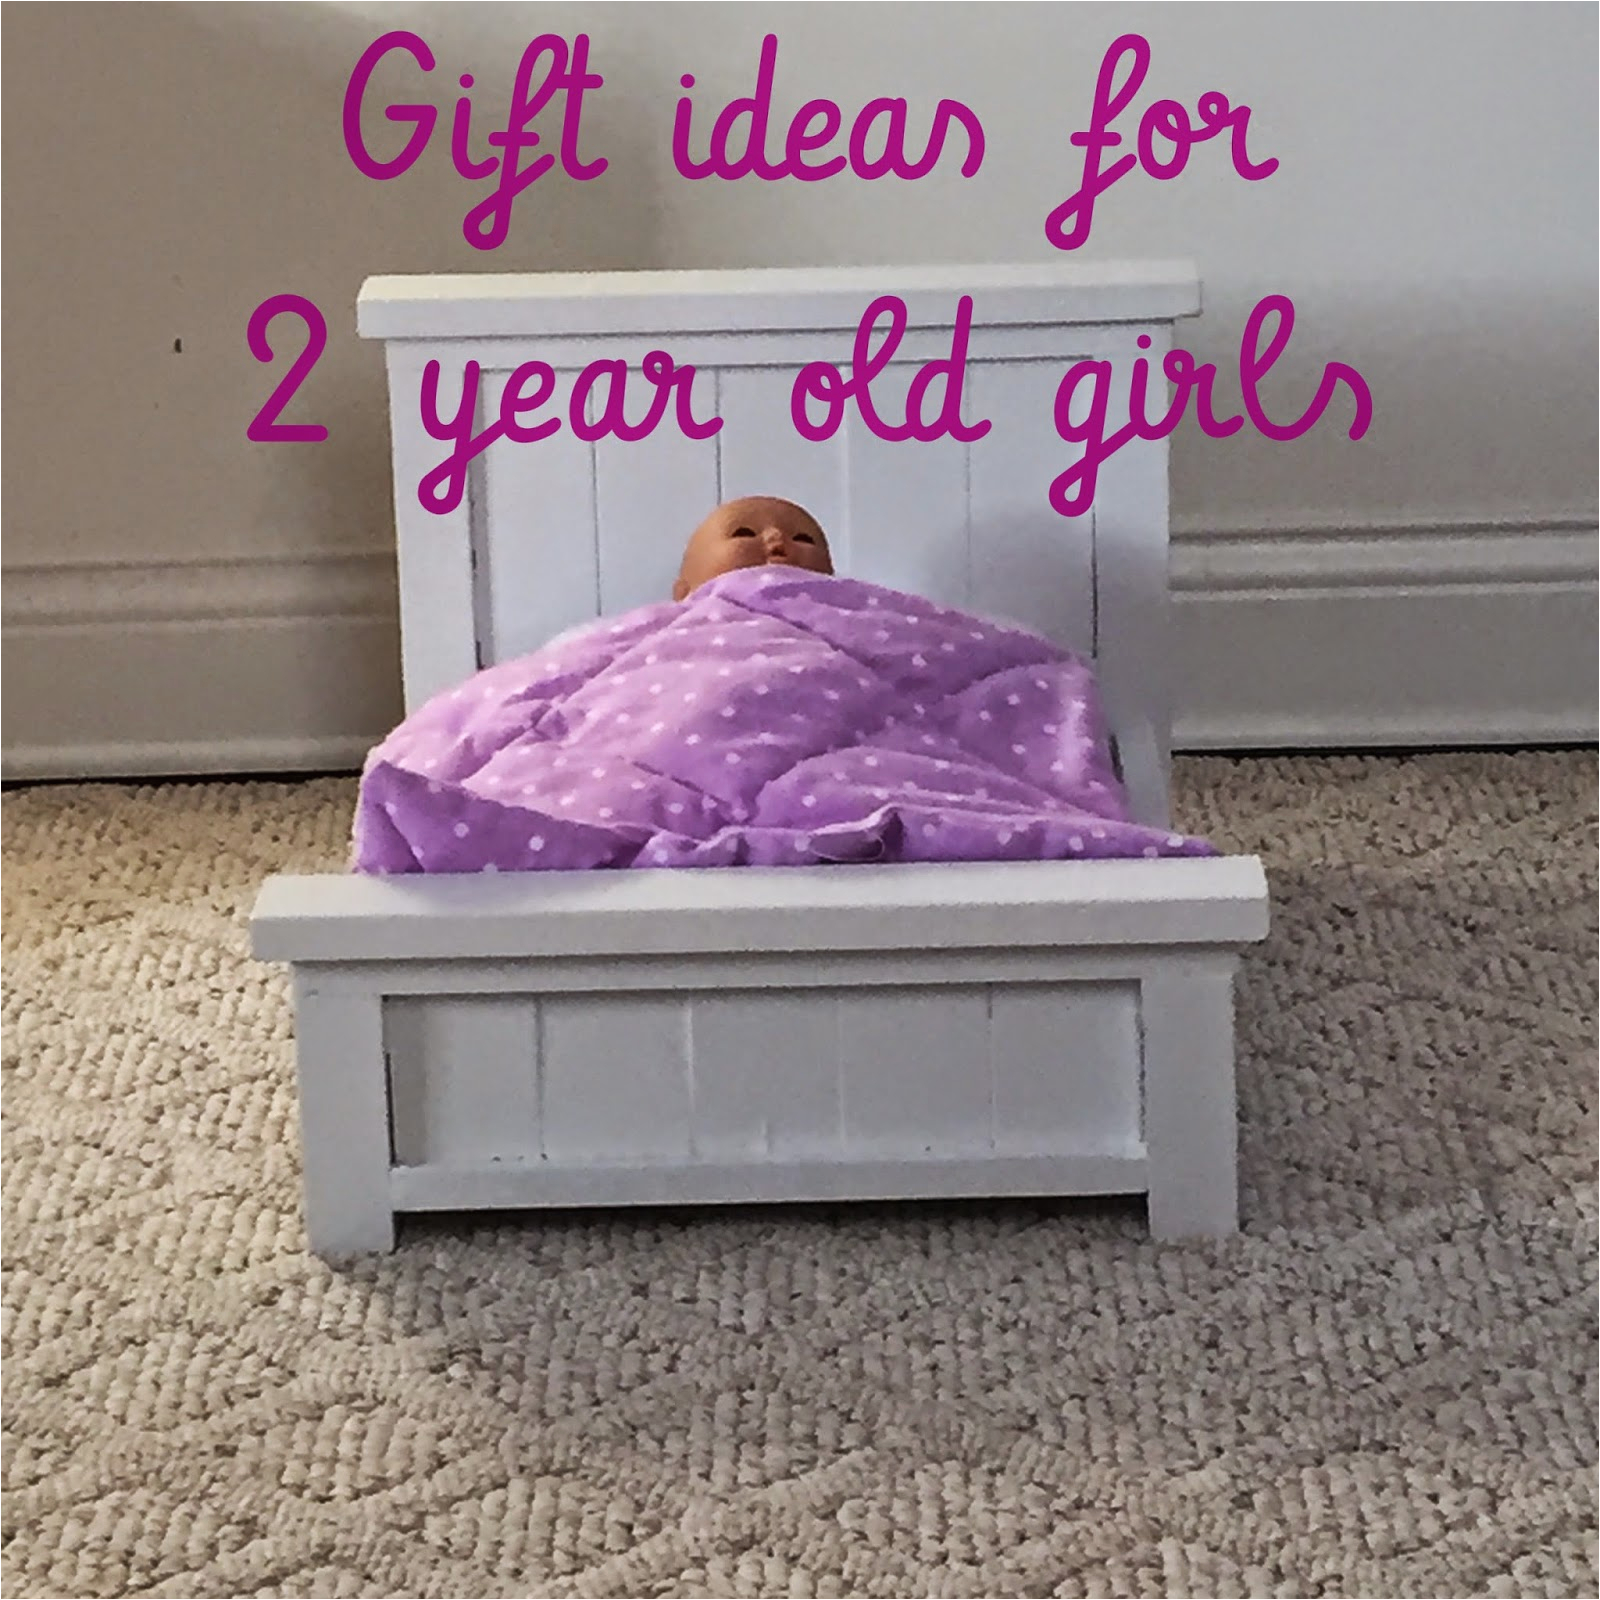 gift ideas for 2 year old girls